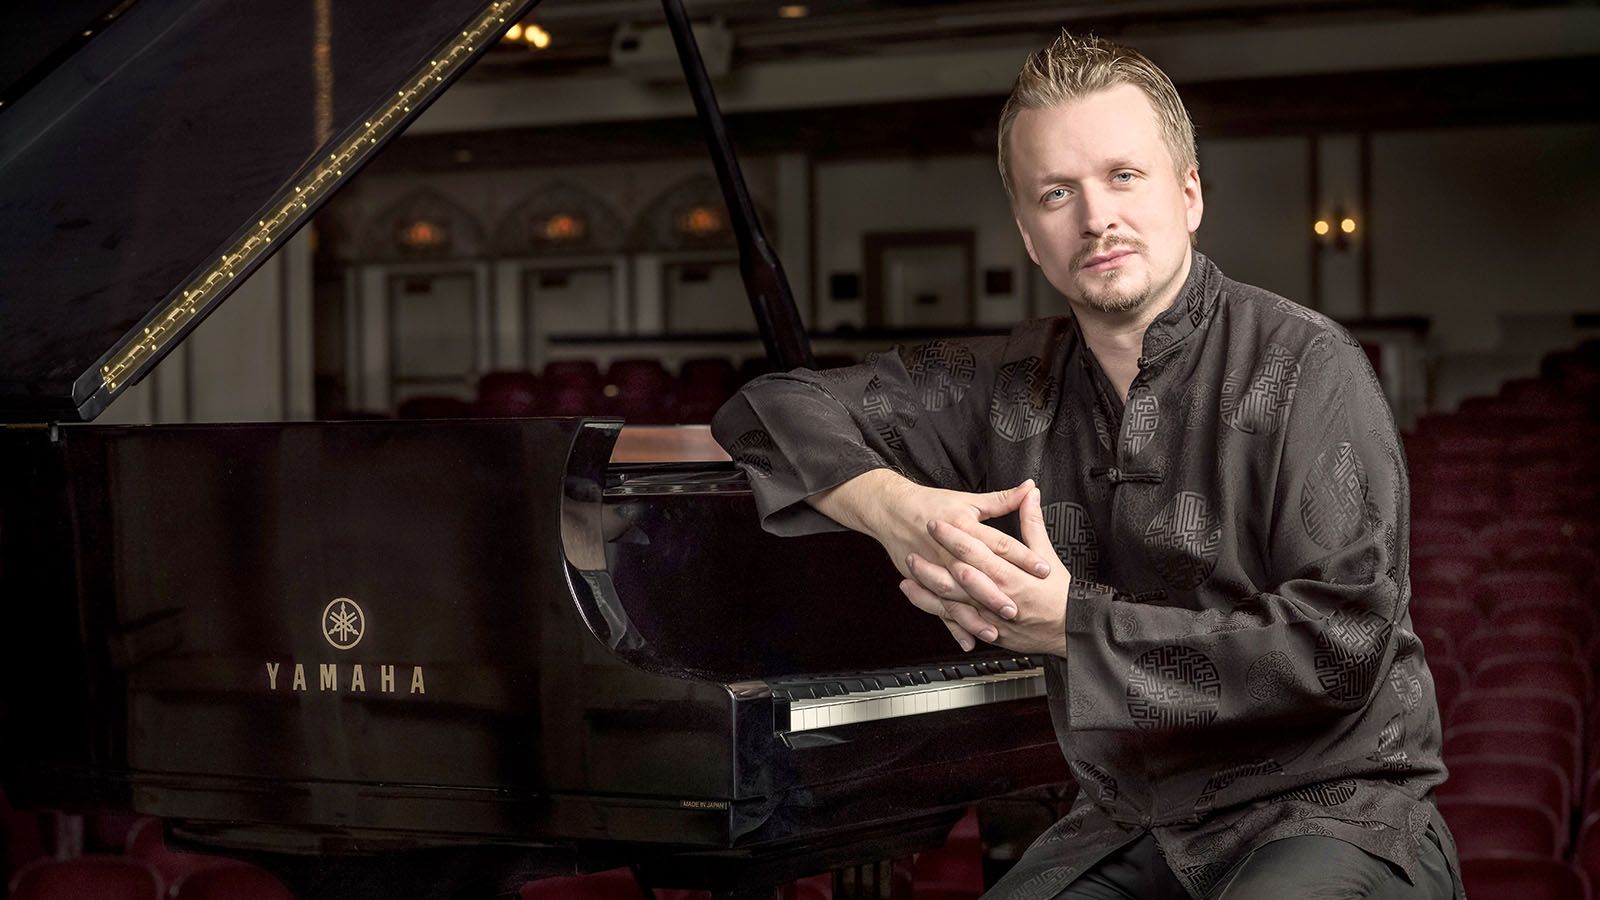 World-renowned pianist Ilya Yakushev will join the Philharmonic for their season finale on May 12 at Embassy Theatre.